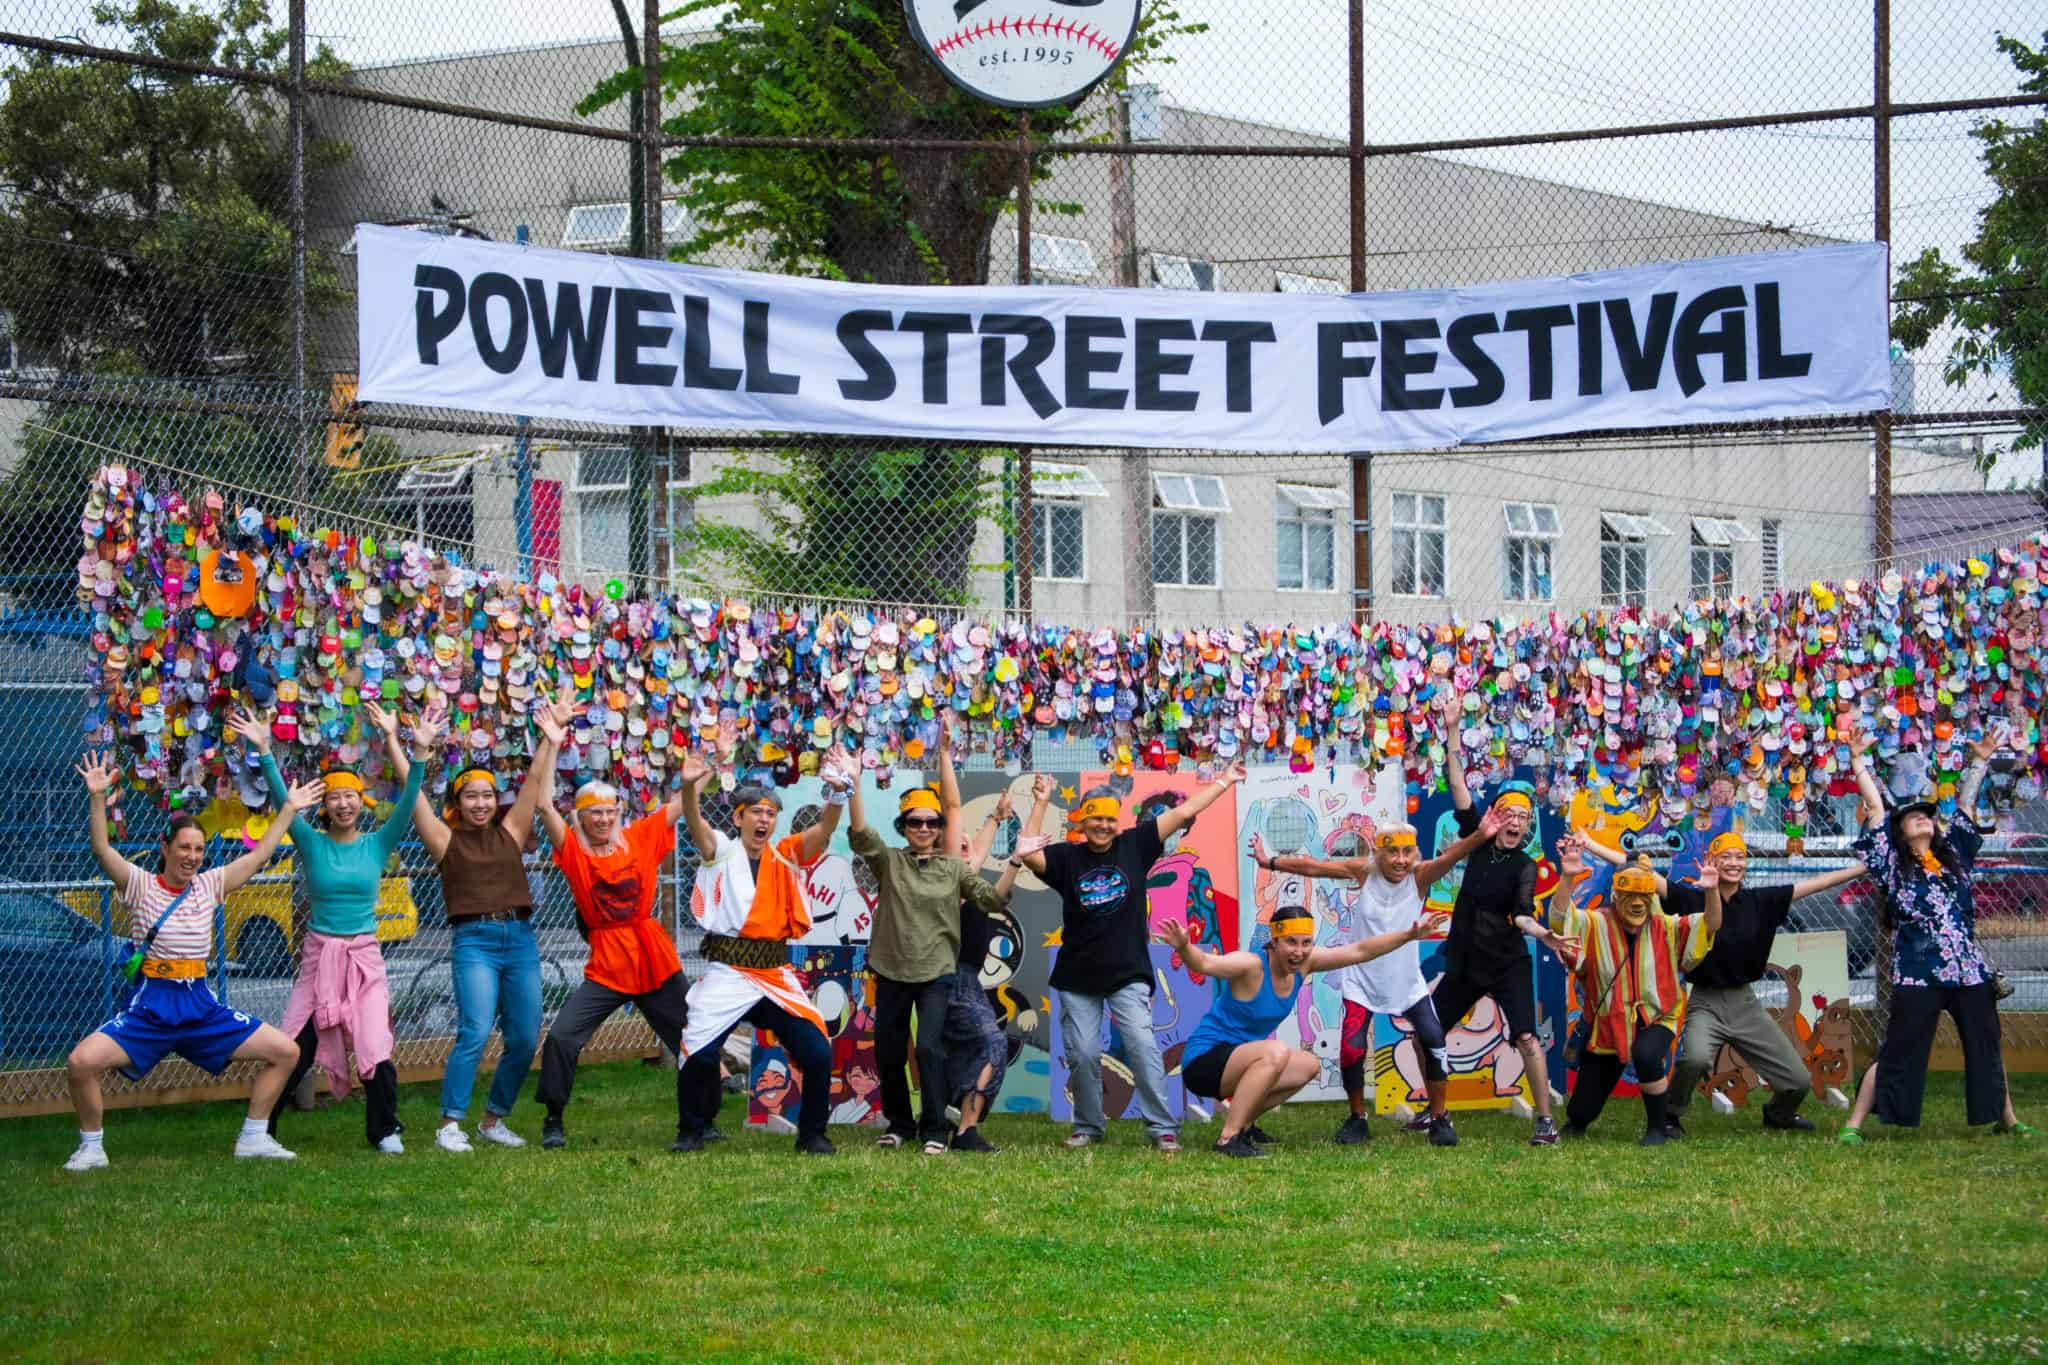 Powell Street Festival Society Read The 2021 Annual Report Now